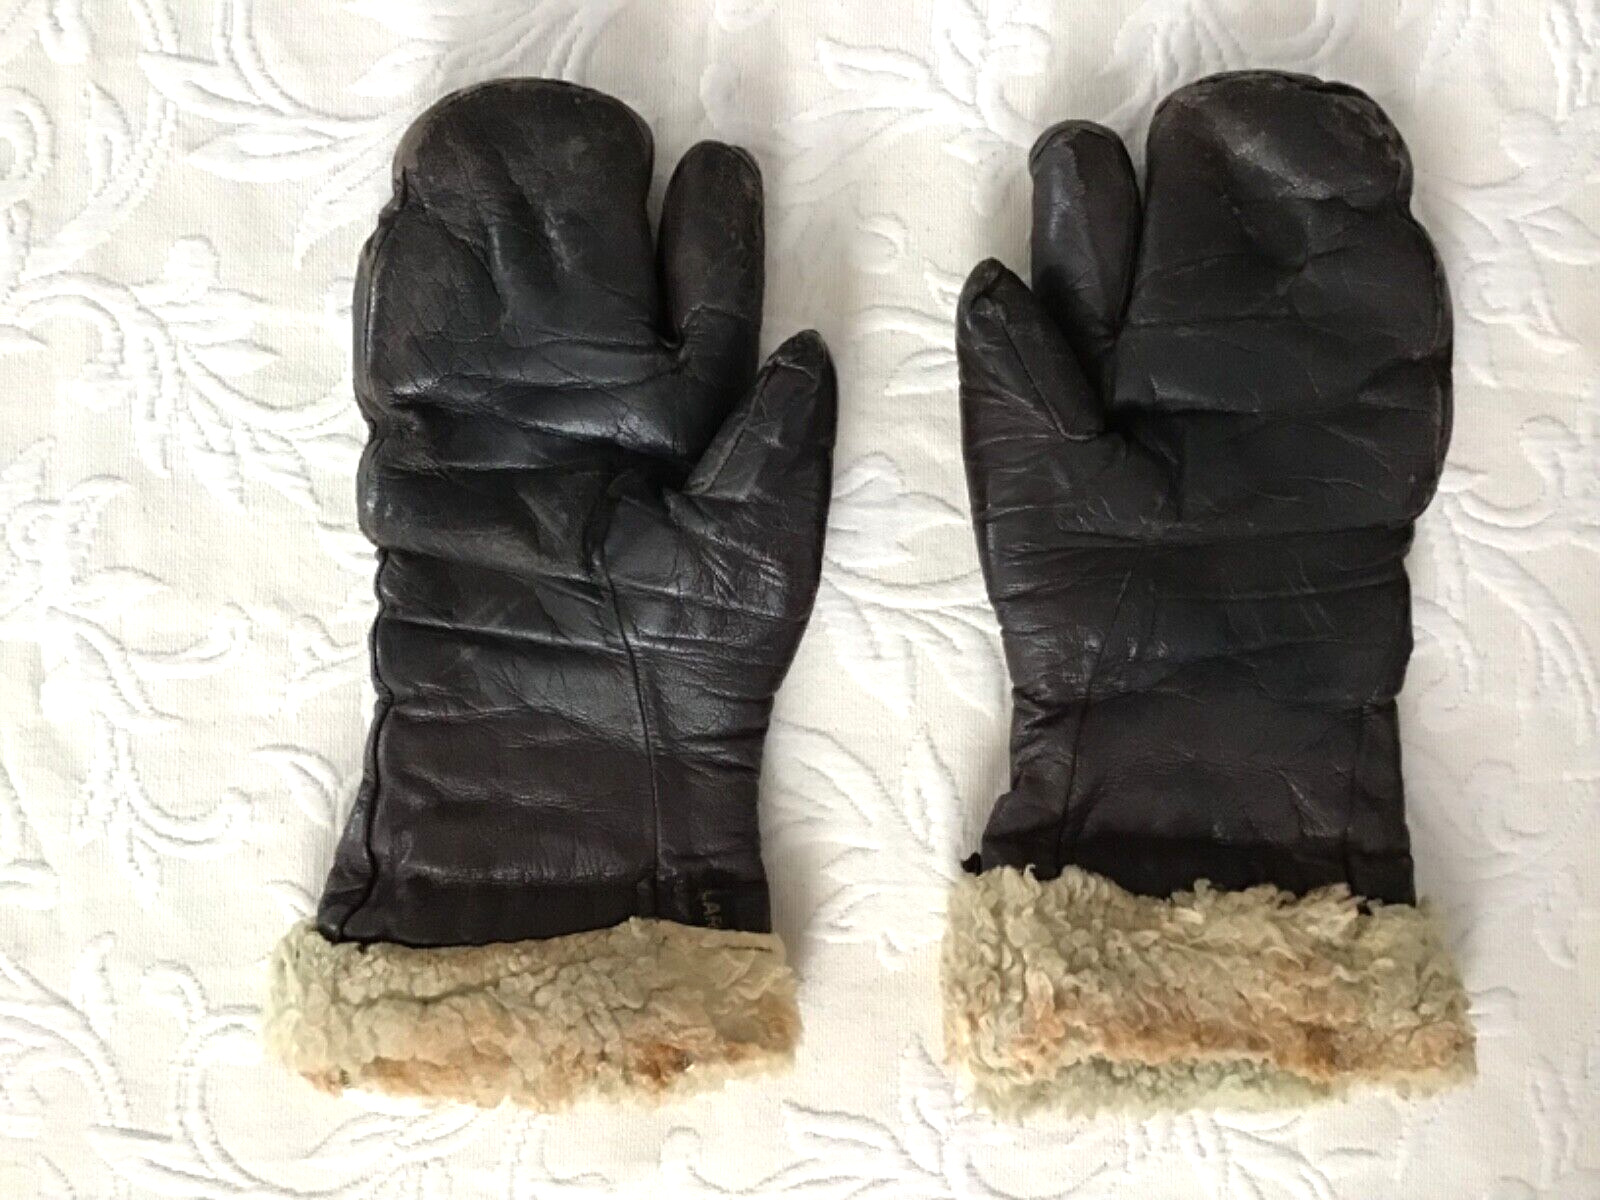 VINTAGE Leather Fleece Flying Mittens U.S. ARMY AIR FORCE LARGE WWII WW2 USAF